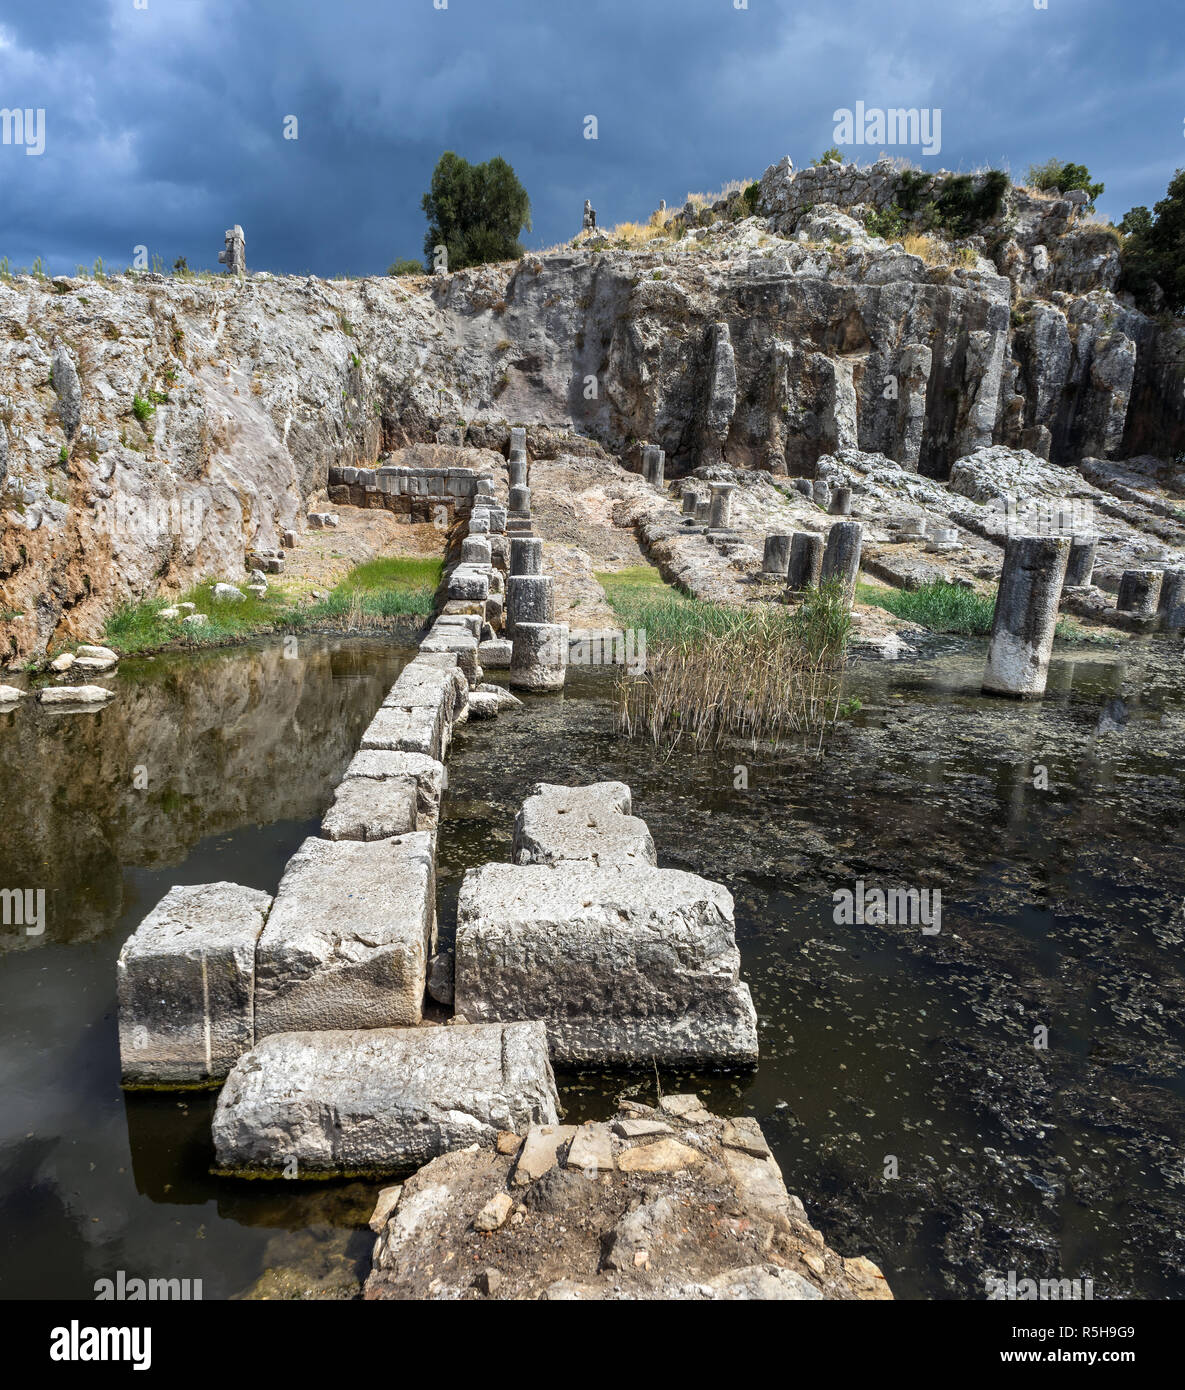 Ancient Greece, ruins of the harbor in town Oiniades (iniades) Stock Photo